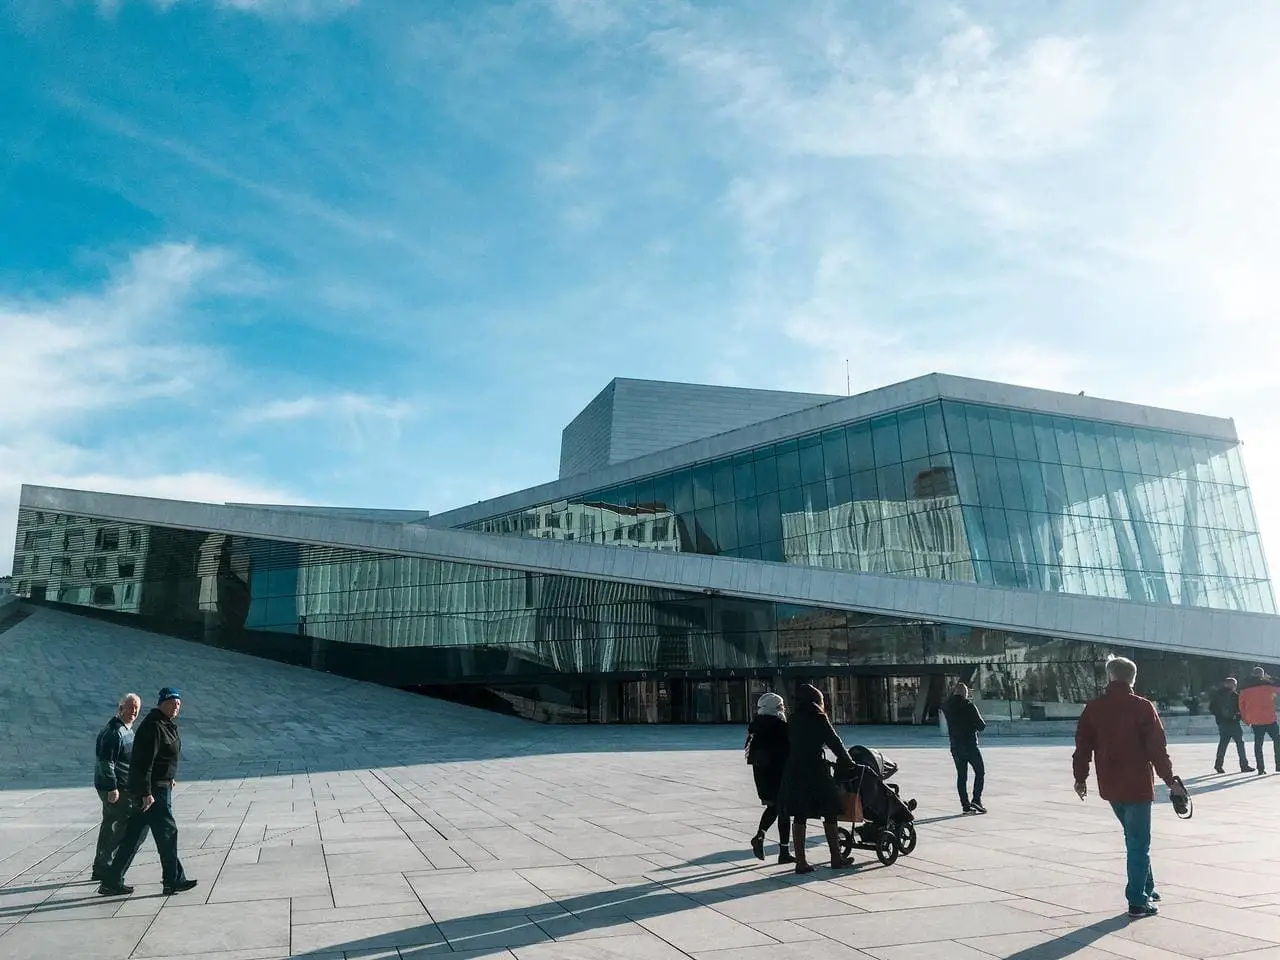 The glass exterior of the Oslo Opera House drenched in the sun. This is an unmissable stop on this 2 days in Oslo itinerary.